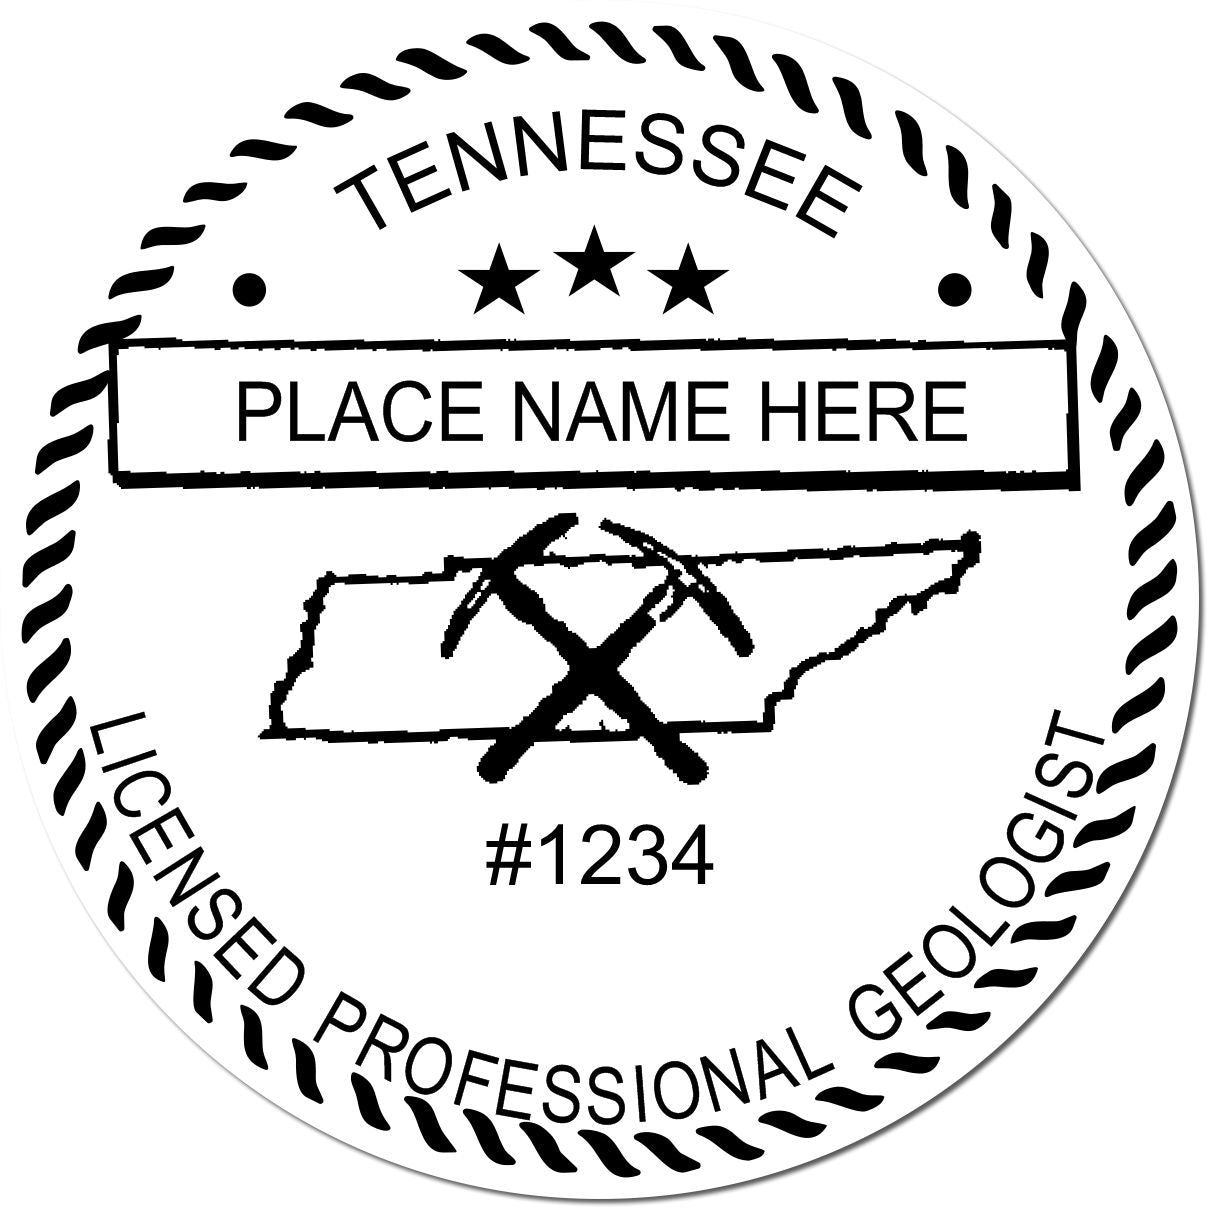 An alternative view of the Premium MaxLight Pre-Inked Tennessee Geology Stamp stamped on a sheet of paper showing the image in use